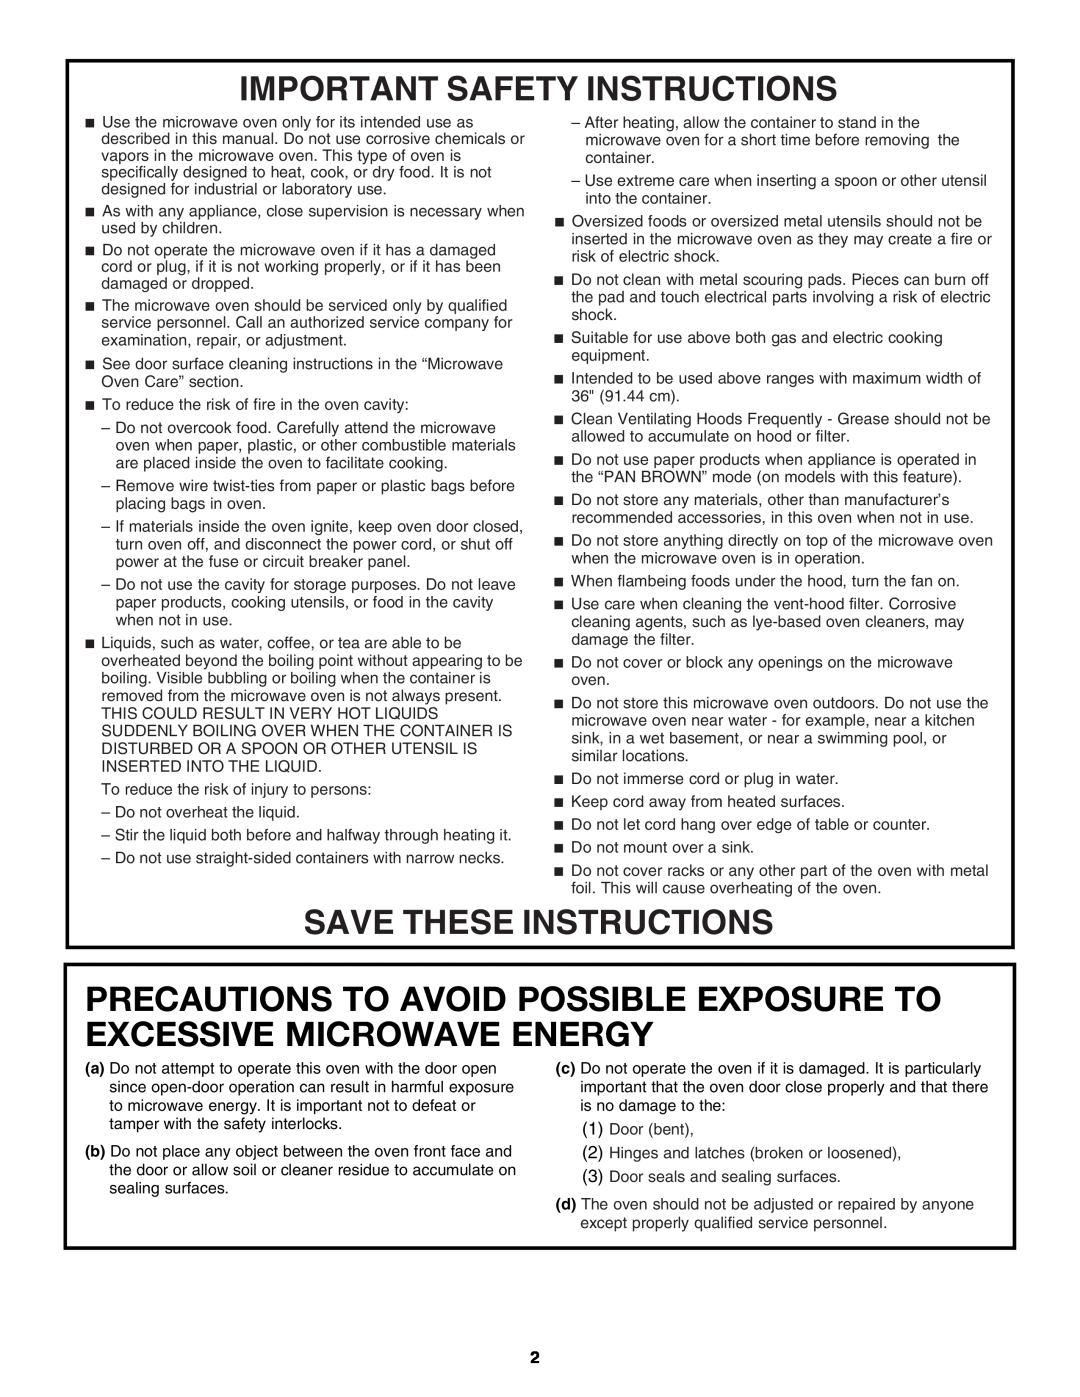 Estate W10131995A Precautions To Avoid Possible Exposure To Excessive Microwave Energy, Important Safety Instructions 